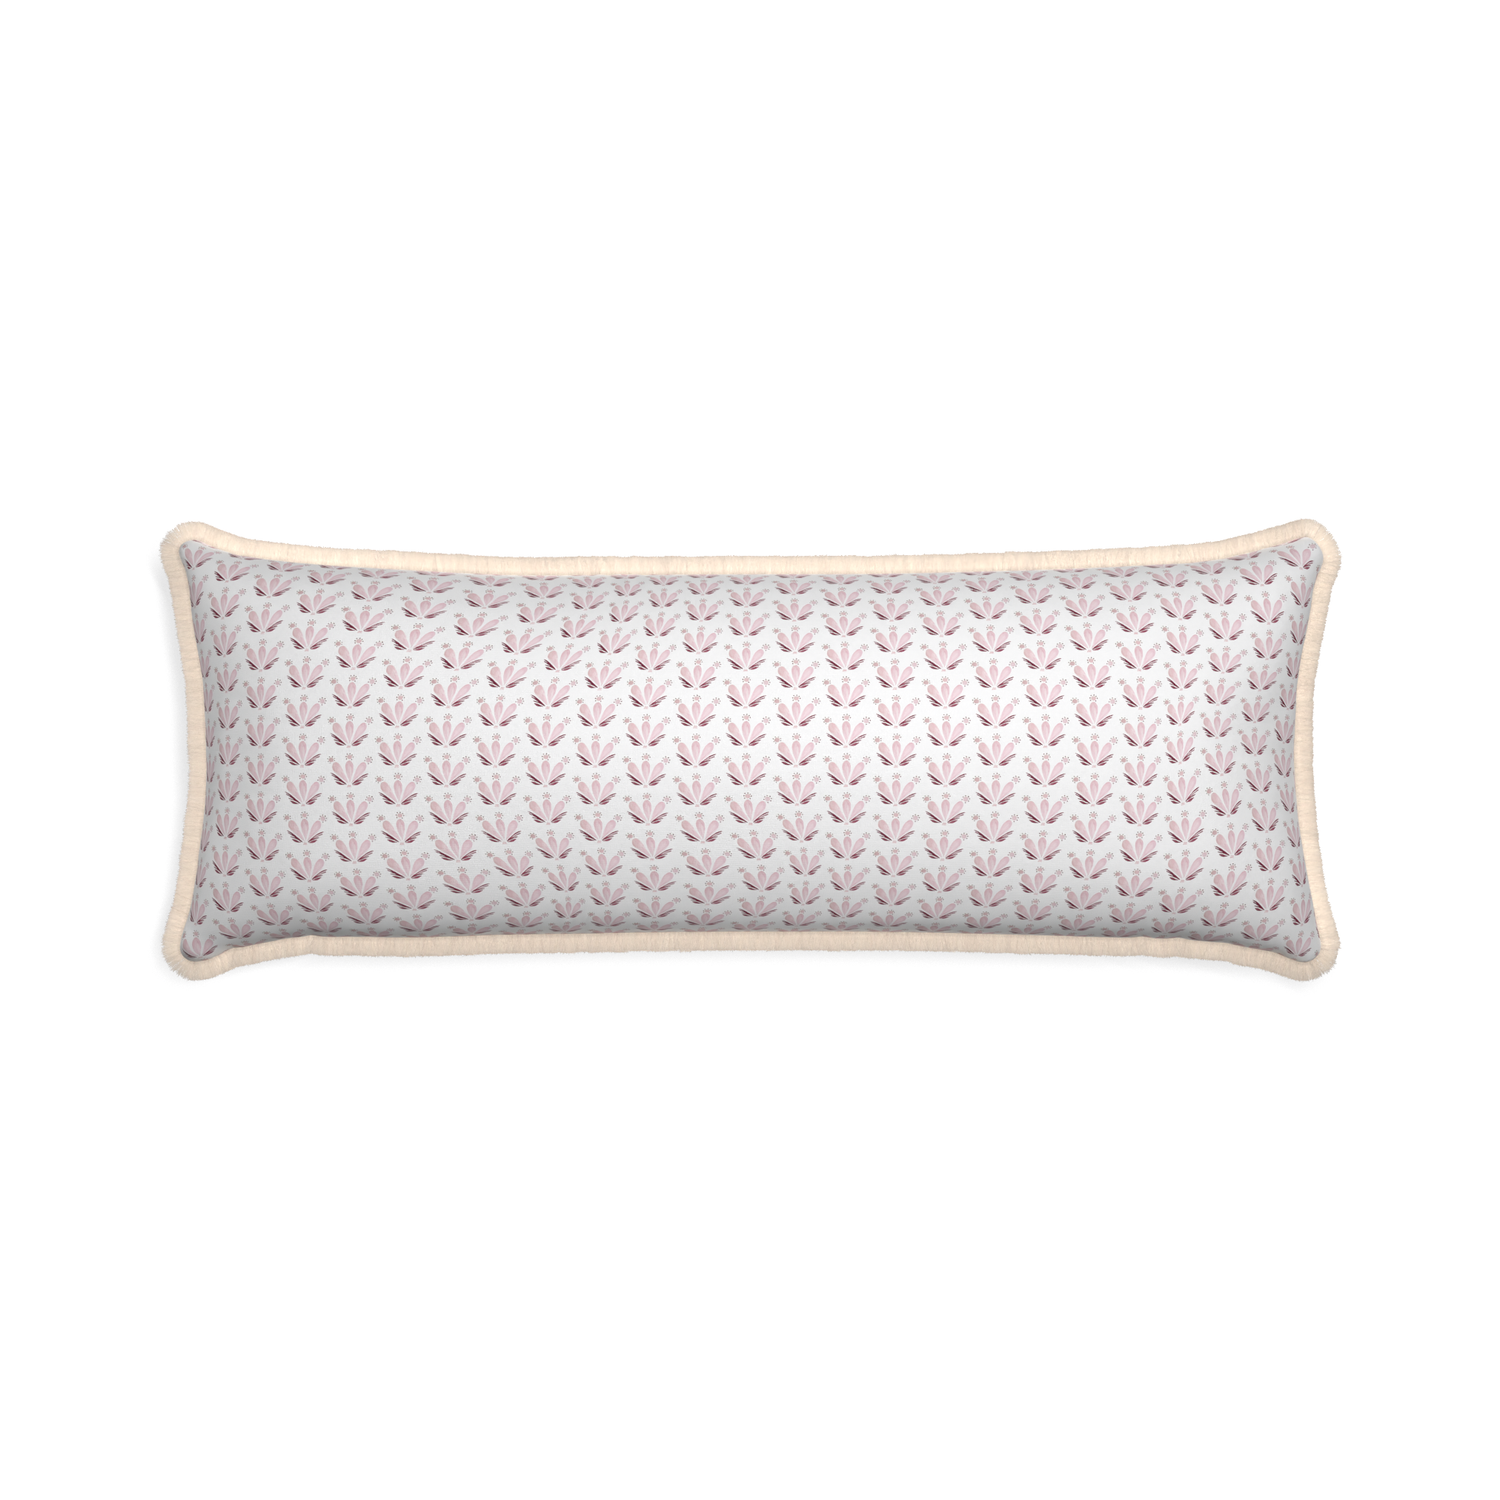 Xl-lumbar serena pink custom pink & burgundy drop repeat floralpillow with cream fringe on white background